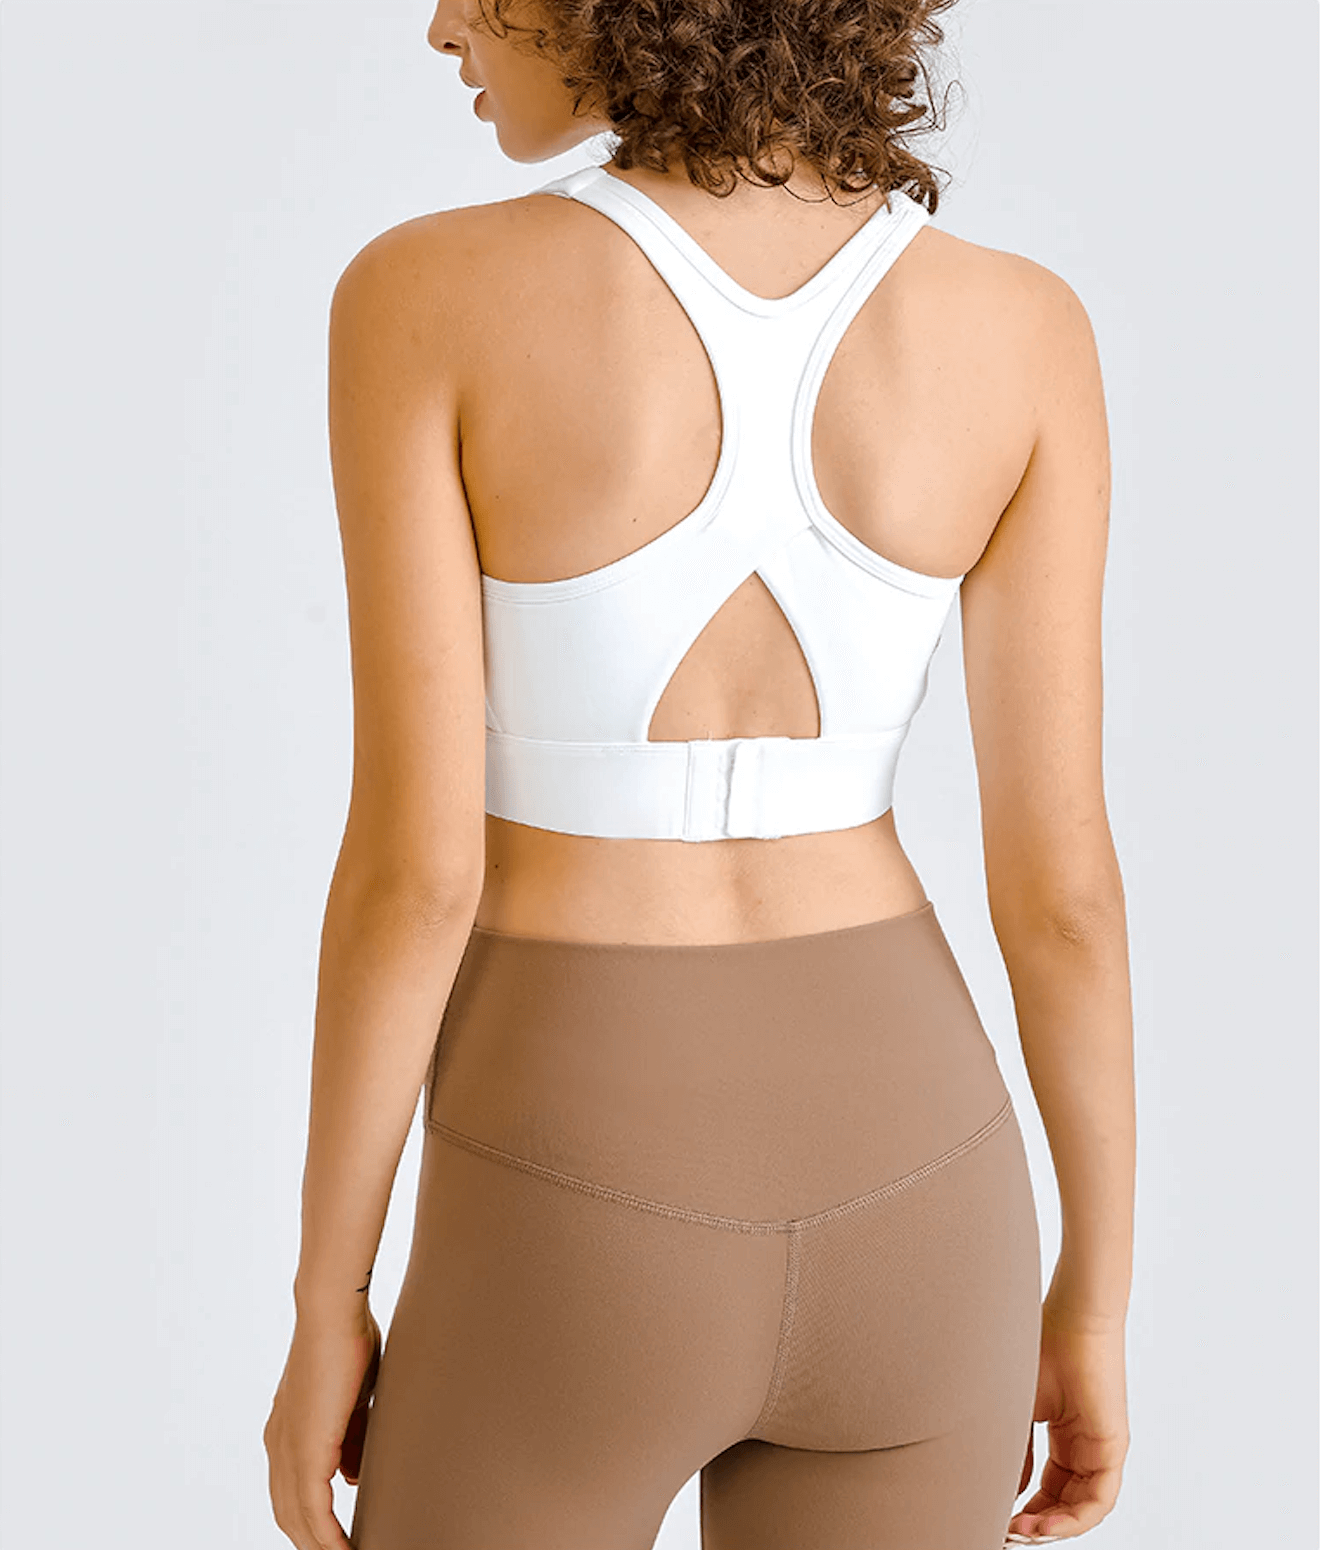 Running Bras: Ladies, Get a Better One - AboveWhispers